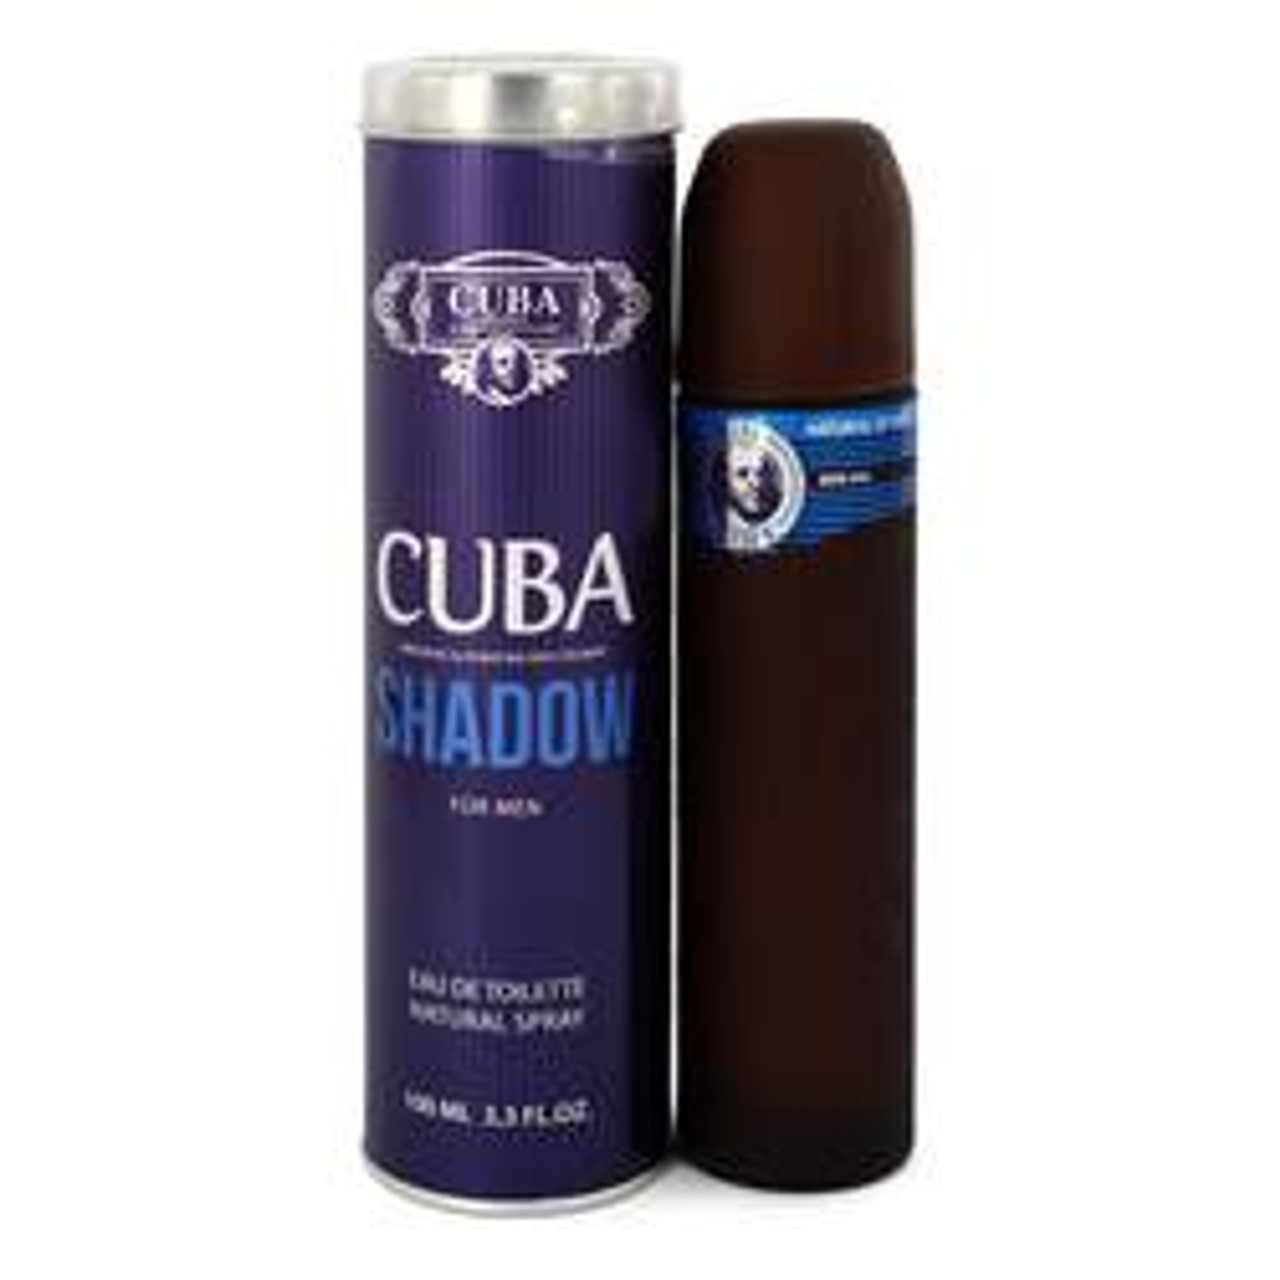 Cuba Shadow Cologne By Fragluxe Eau De Toilette Spray 3.3 oz for Men - [From 23.00 - Choose pk Qty ] - *Ships from Miami